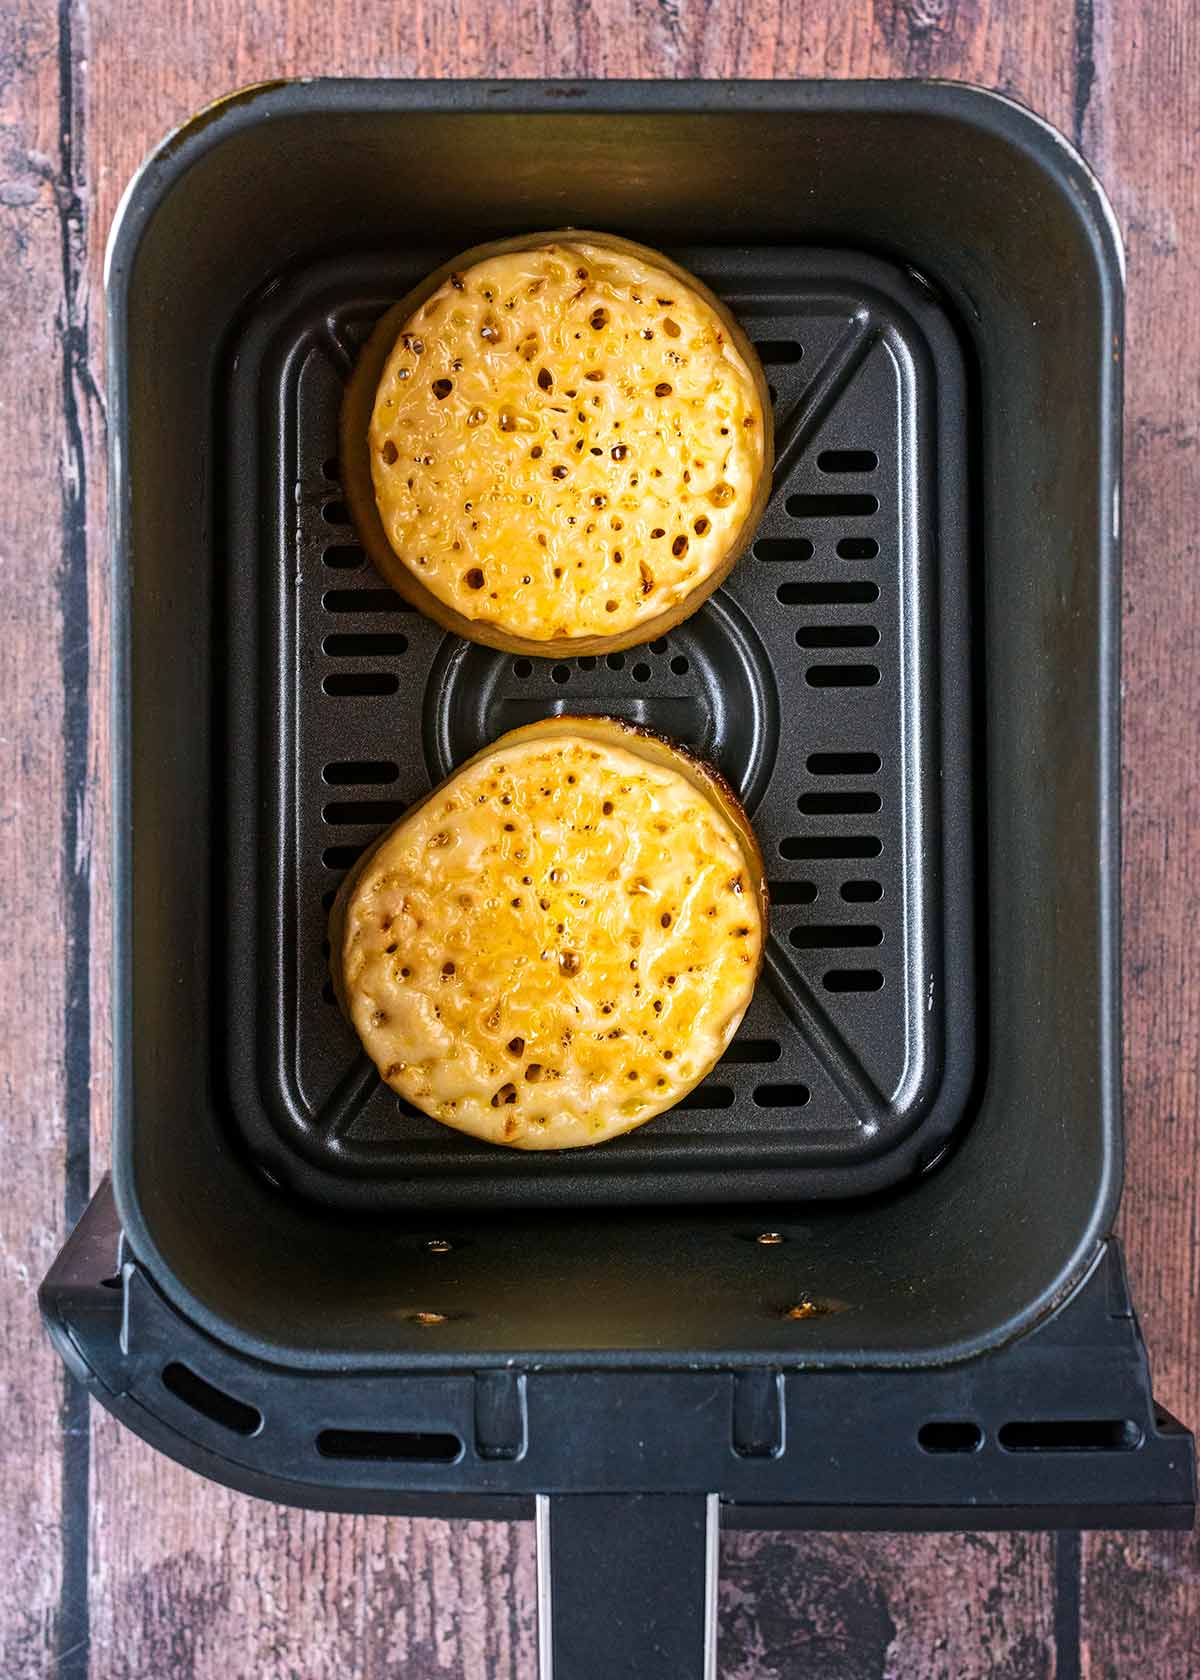 Two egg soaked crumpets in an air fryer basket.